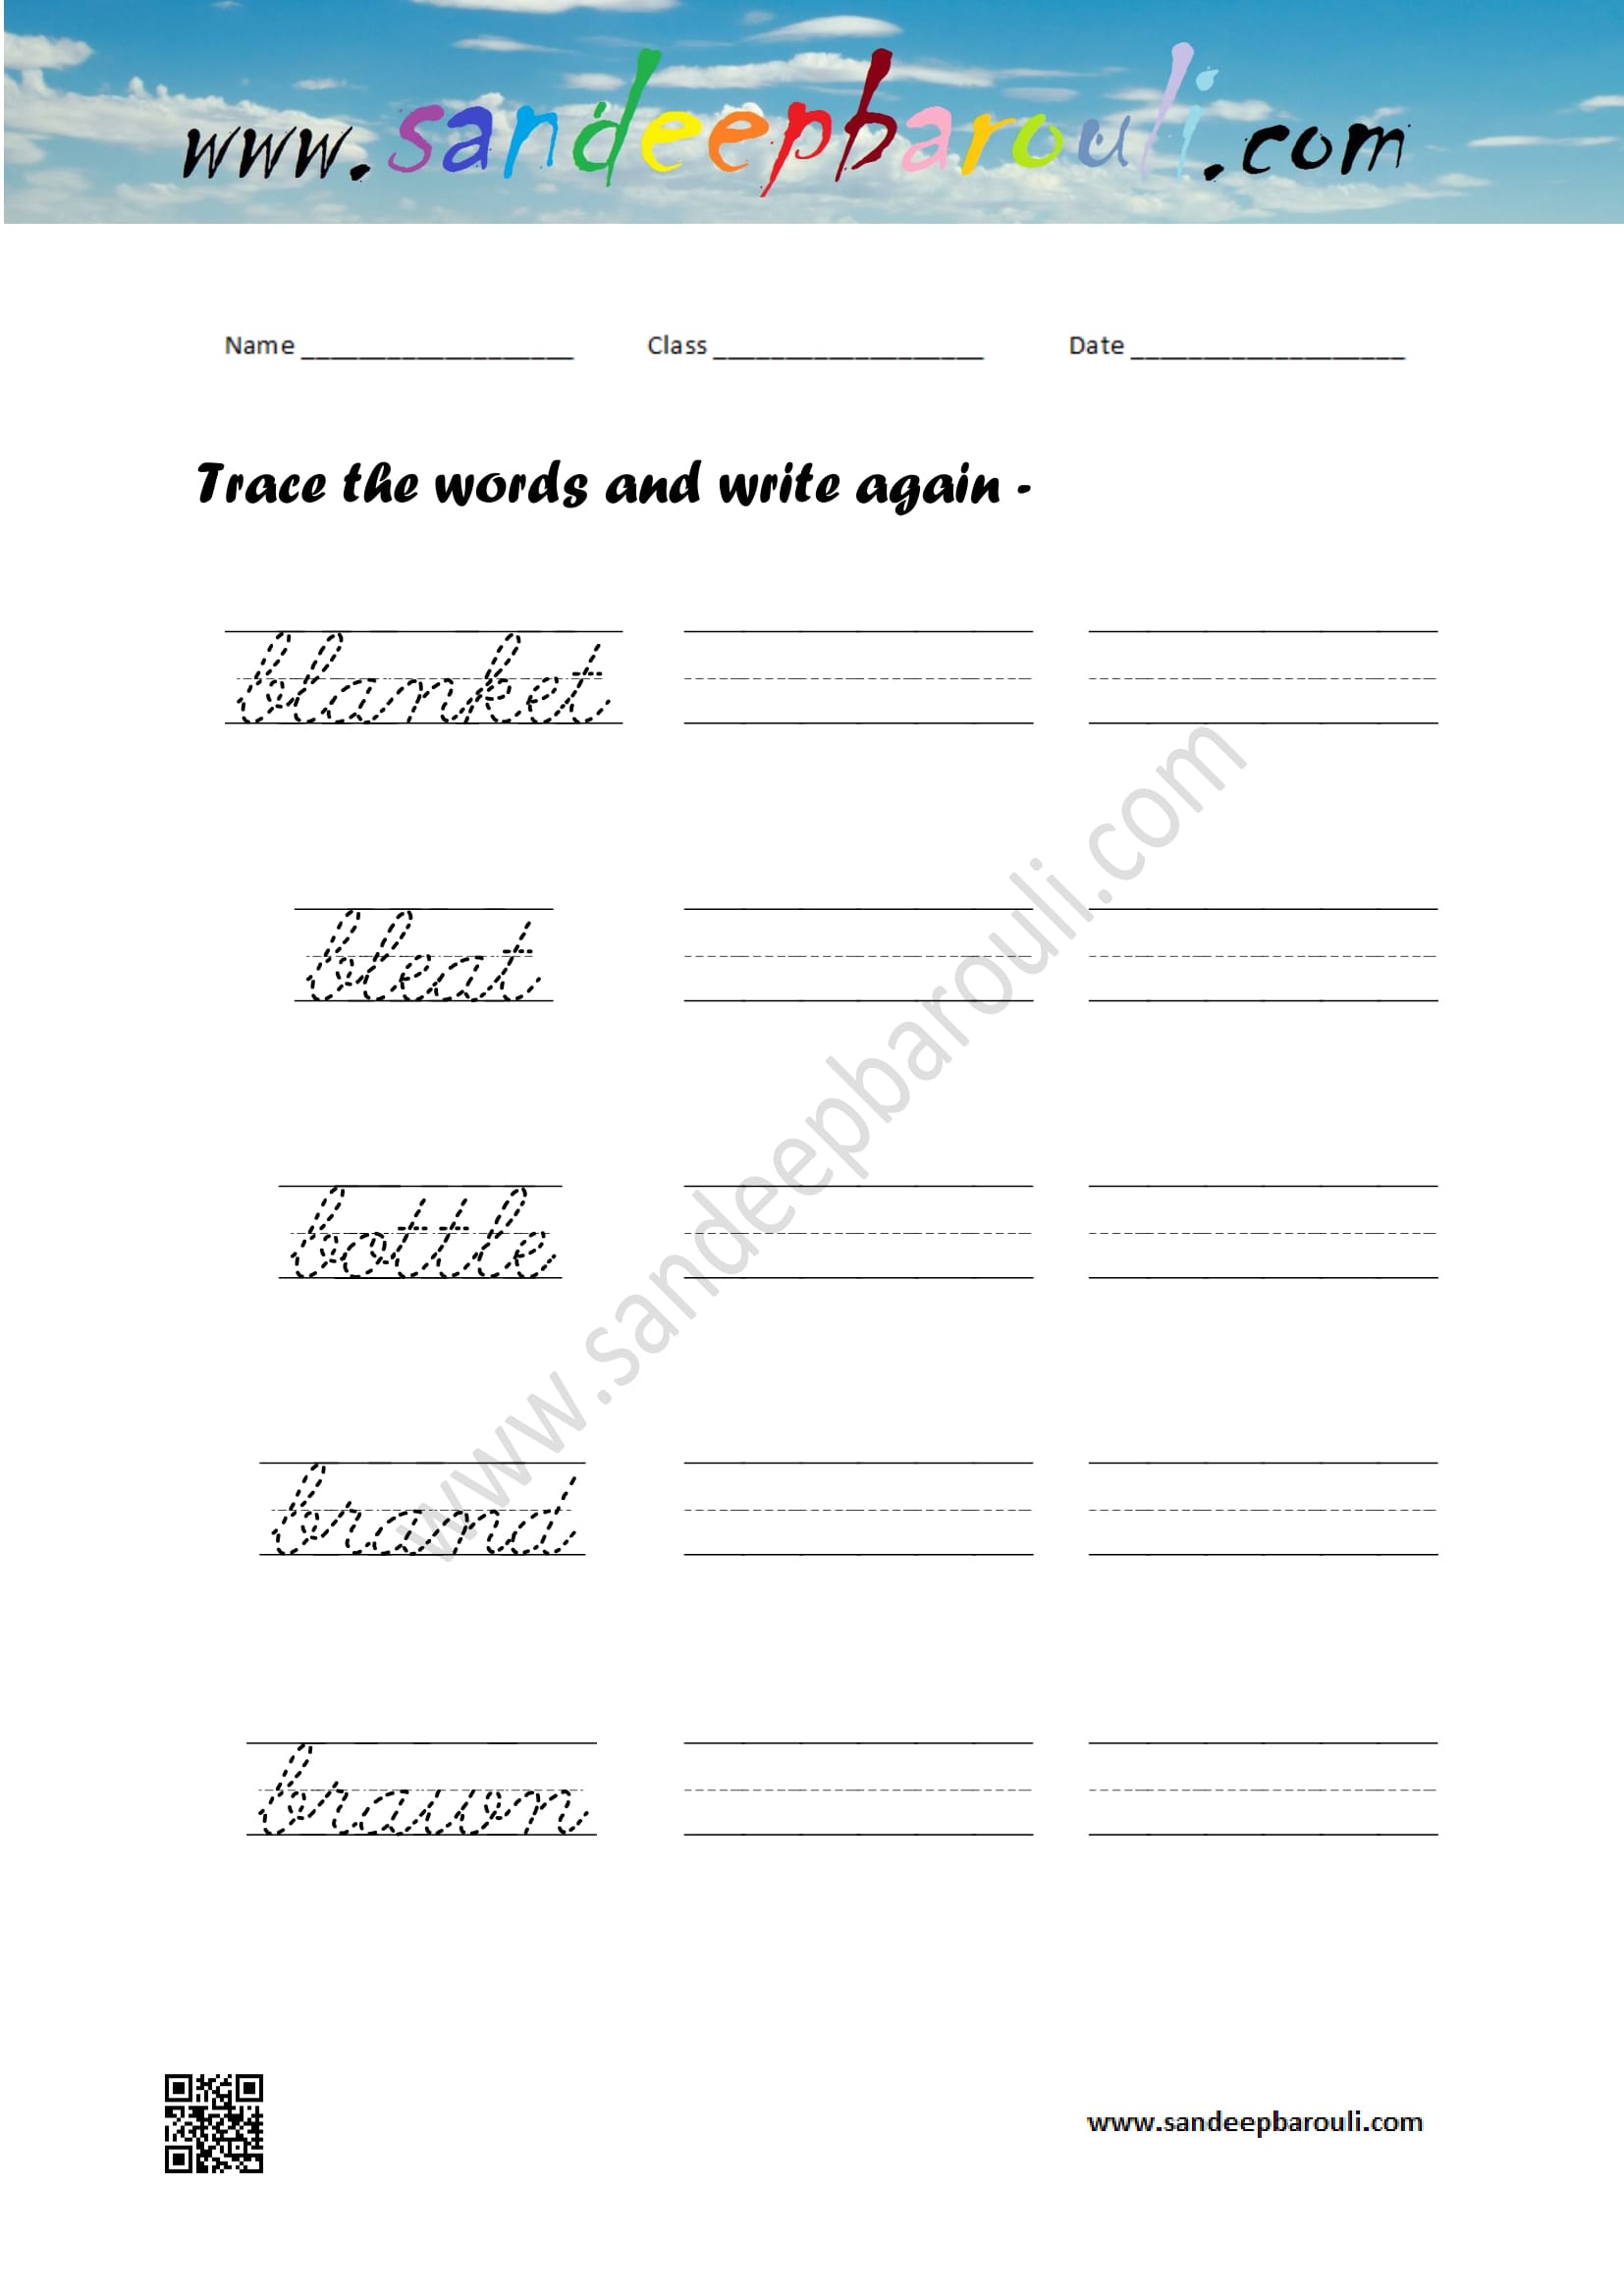 Cursive writing worksheet – trace the words and write again (117)